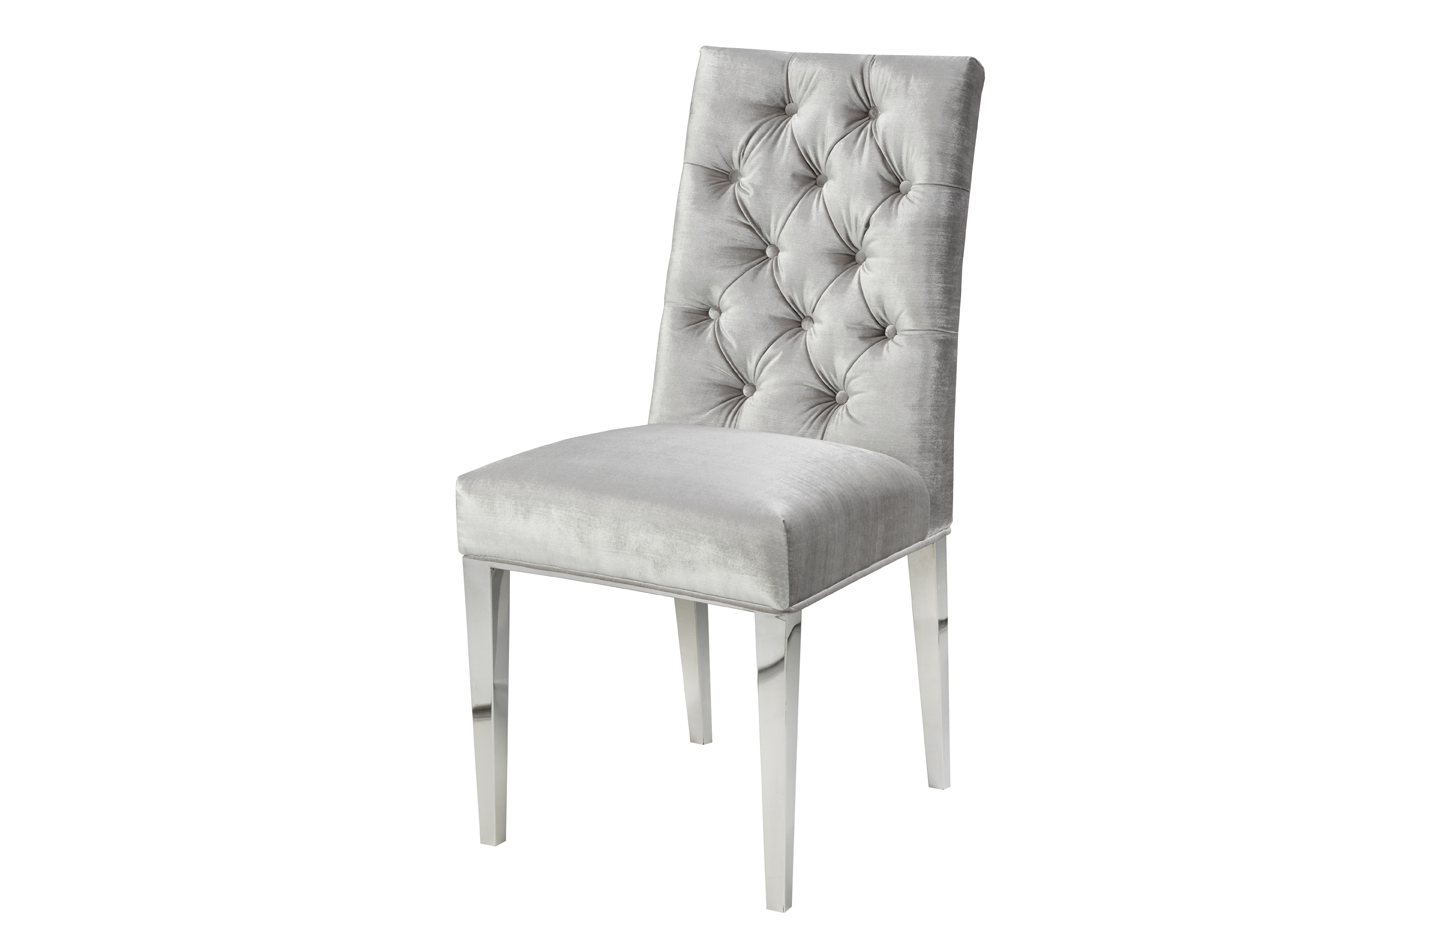 Argos Dining Chair | Staging and Decor